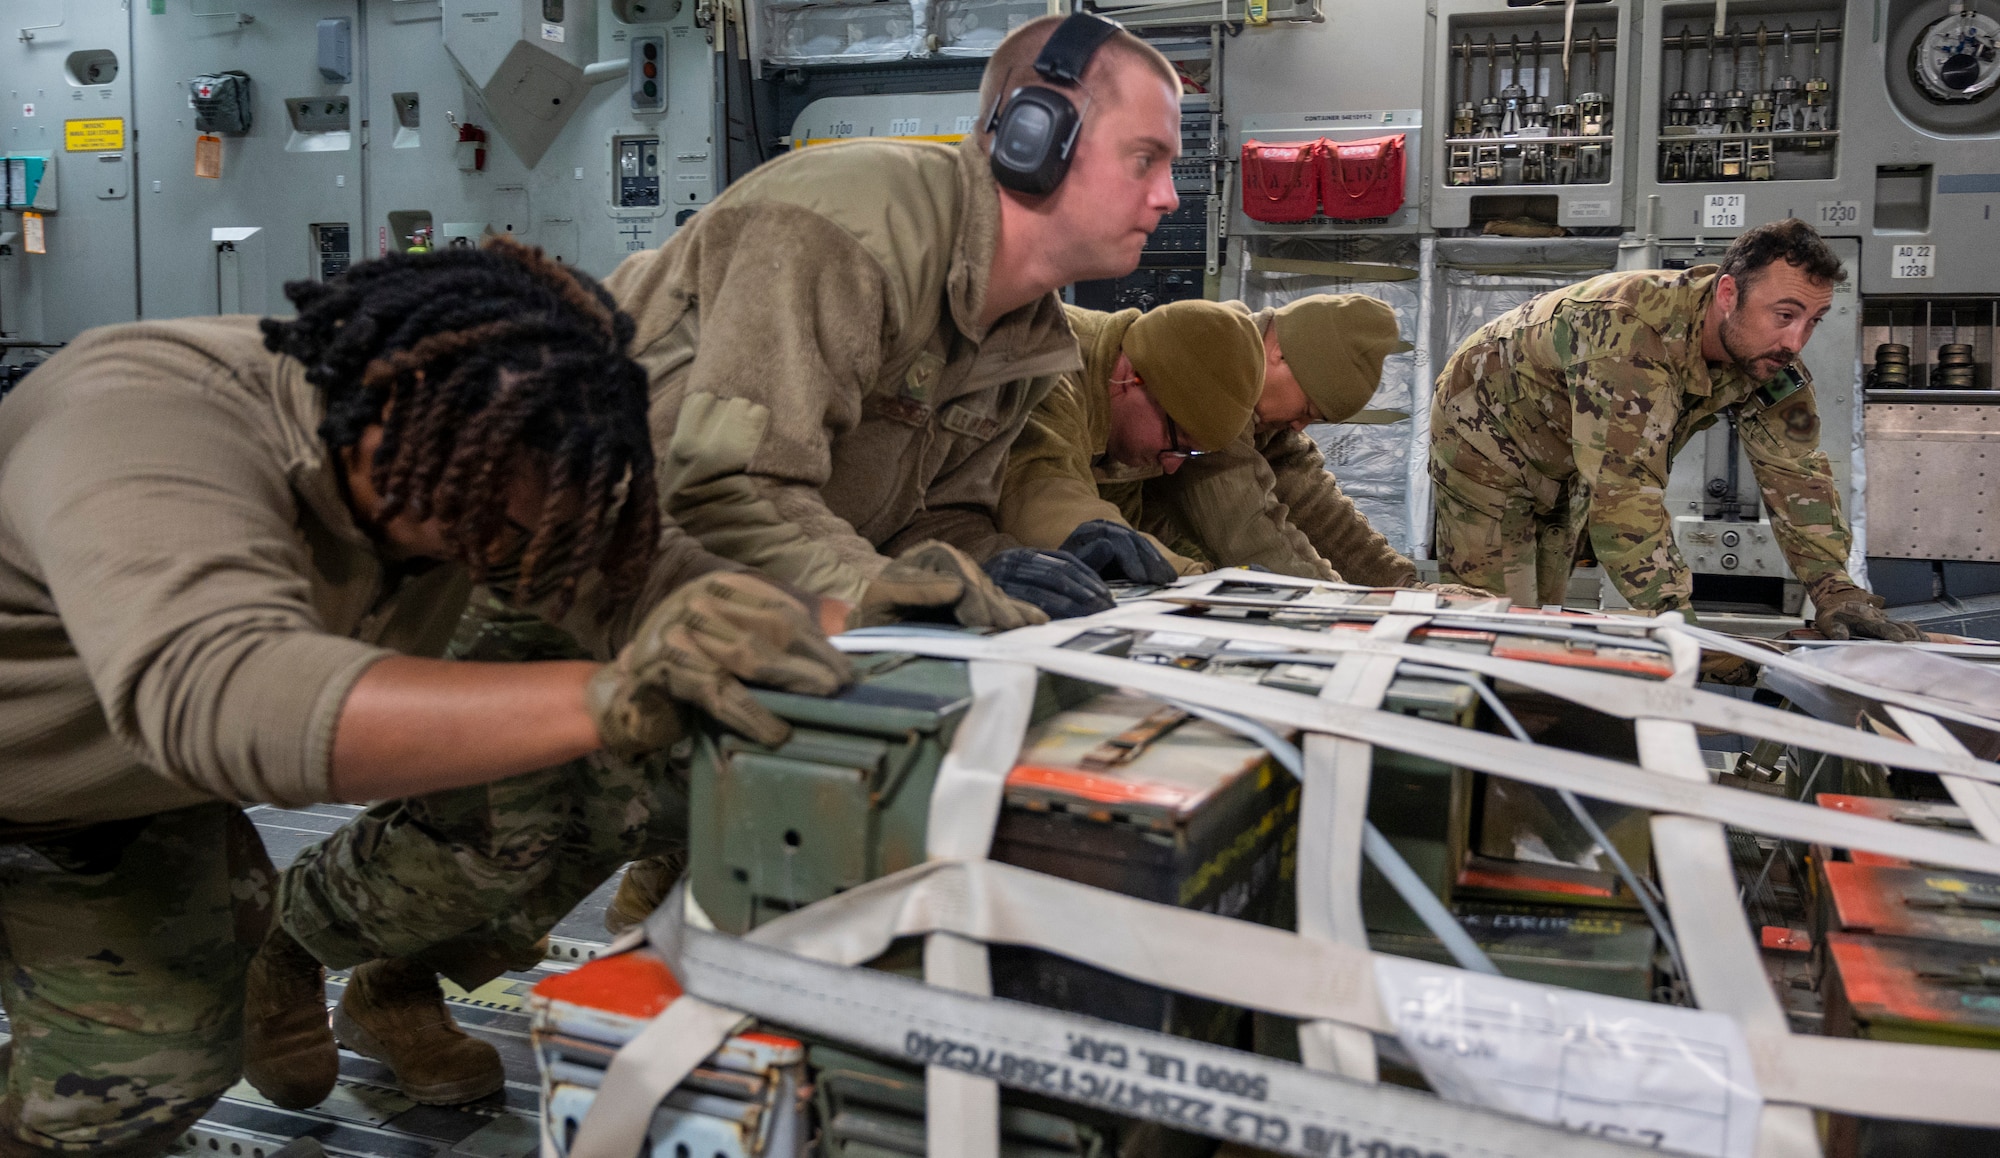 U.S. Air Force Airmen from the 386th Expeditionary Logistics Readiness Squadron push a palette of supplies off a C-17 Globemaster III